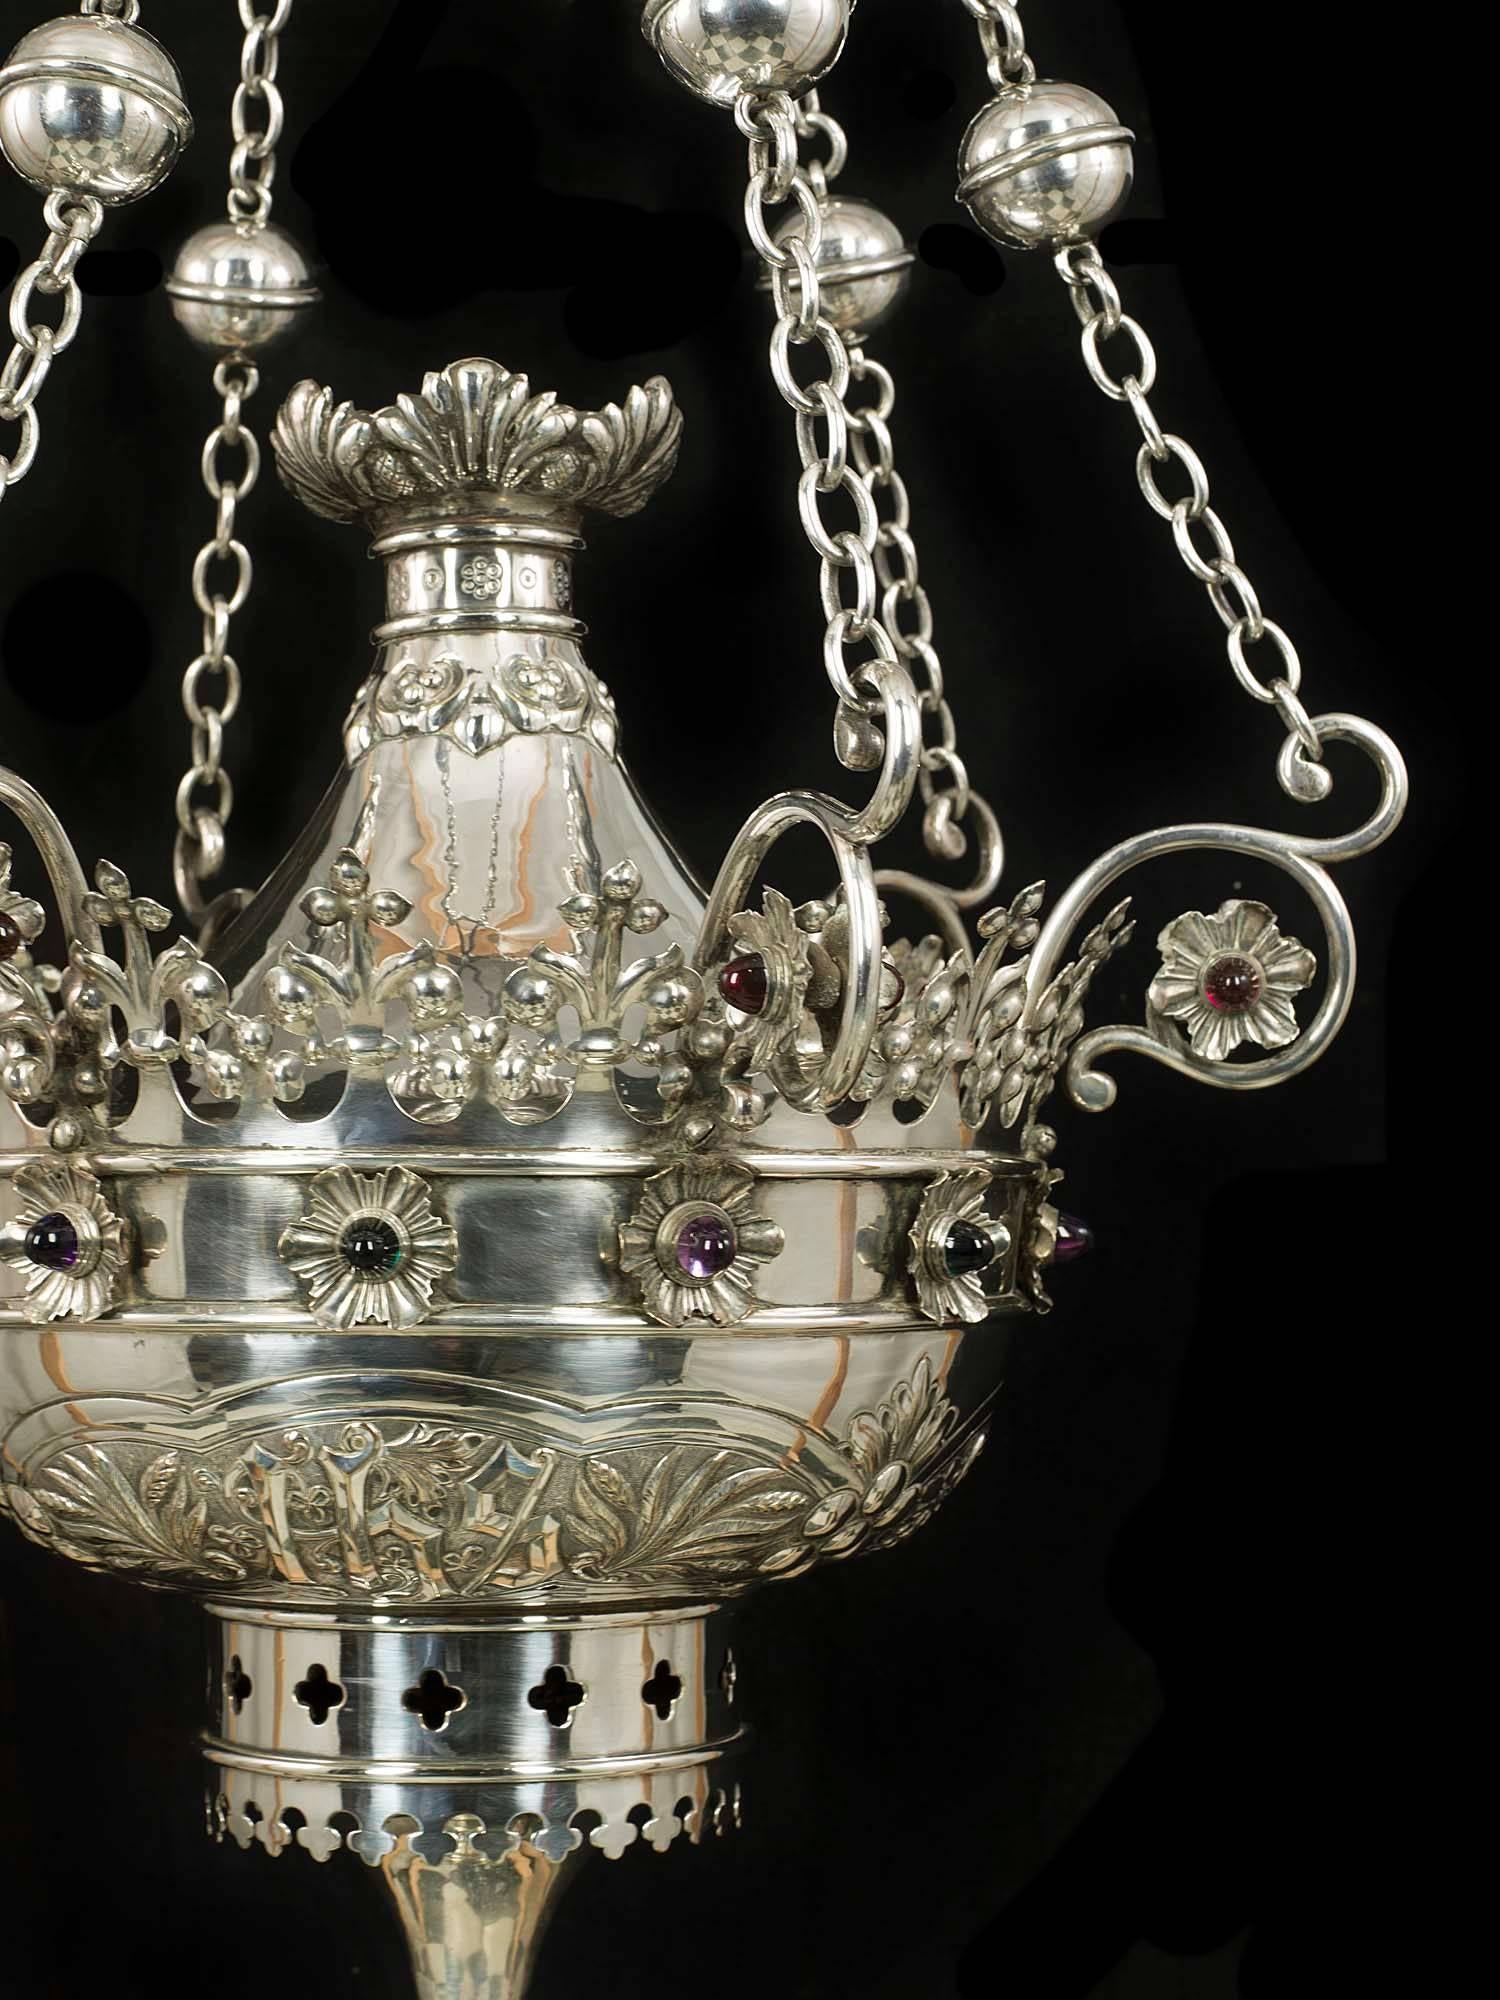 A magnificent and rare Gothic Revival, Byzantine influenced antique silver plated incense burner. The highly decorative bowl, set with many coloured glass cabochon and bearing the initials I H S a symbolic monogram of Christ, is suspended from a